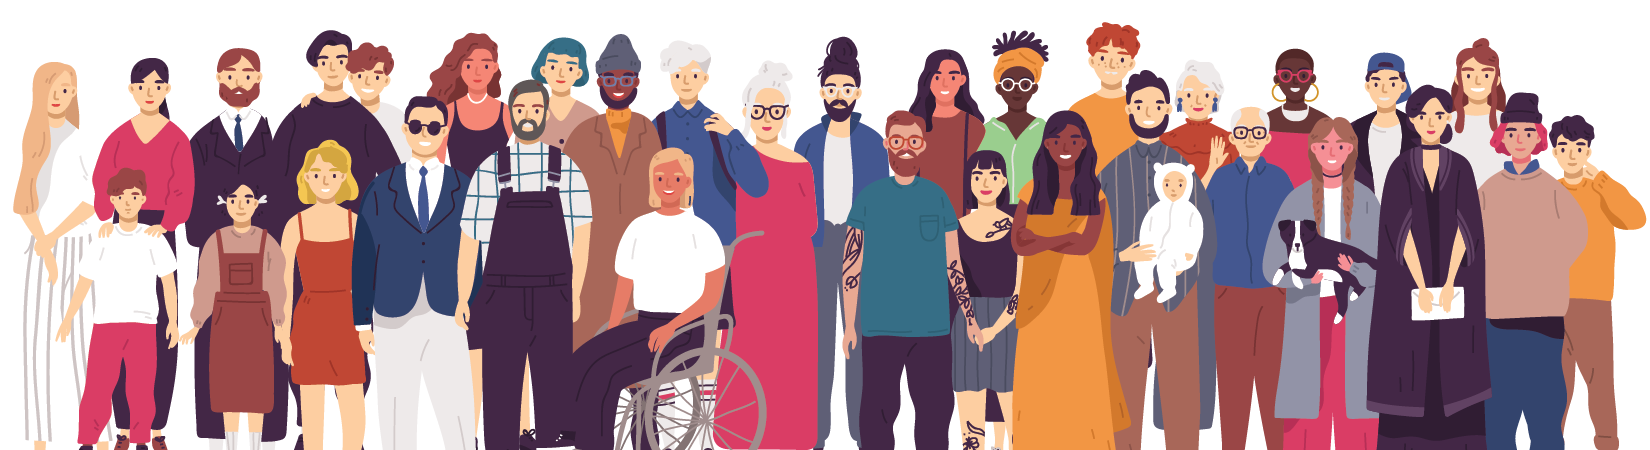 Image Description: A colorful, modern illustration of a large, diverse group of people representing Vermonters. There are many different ages, genders, races, and other demographics represented in the illustration